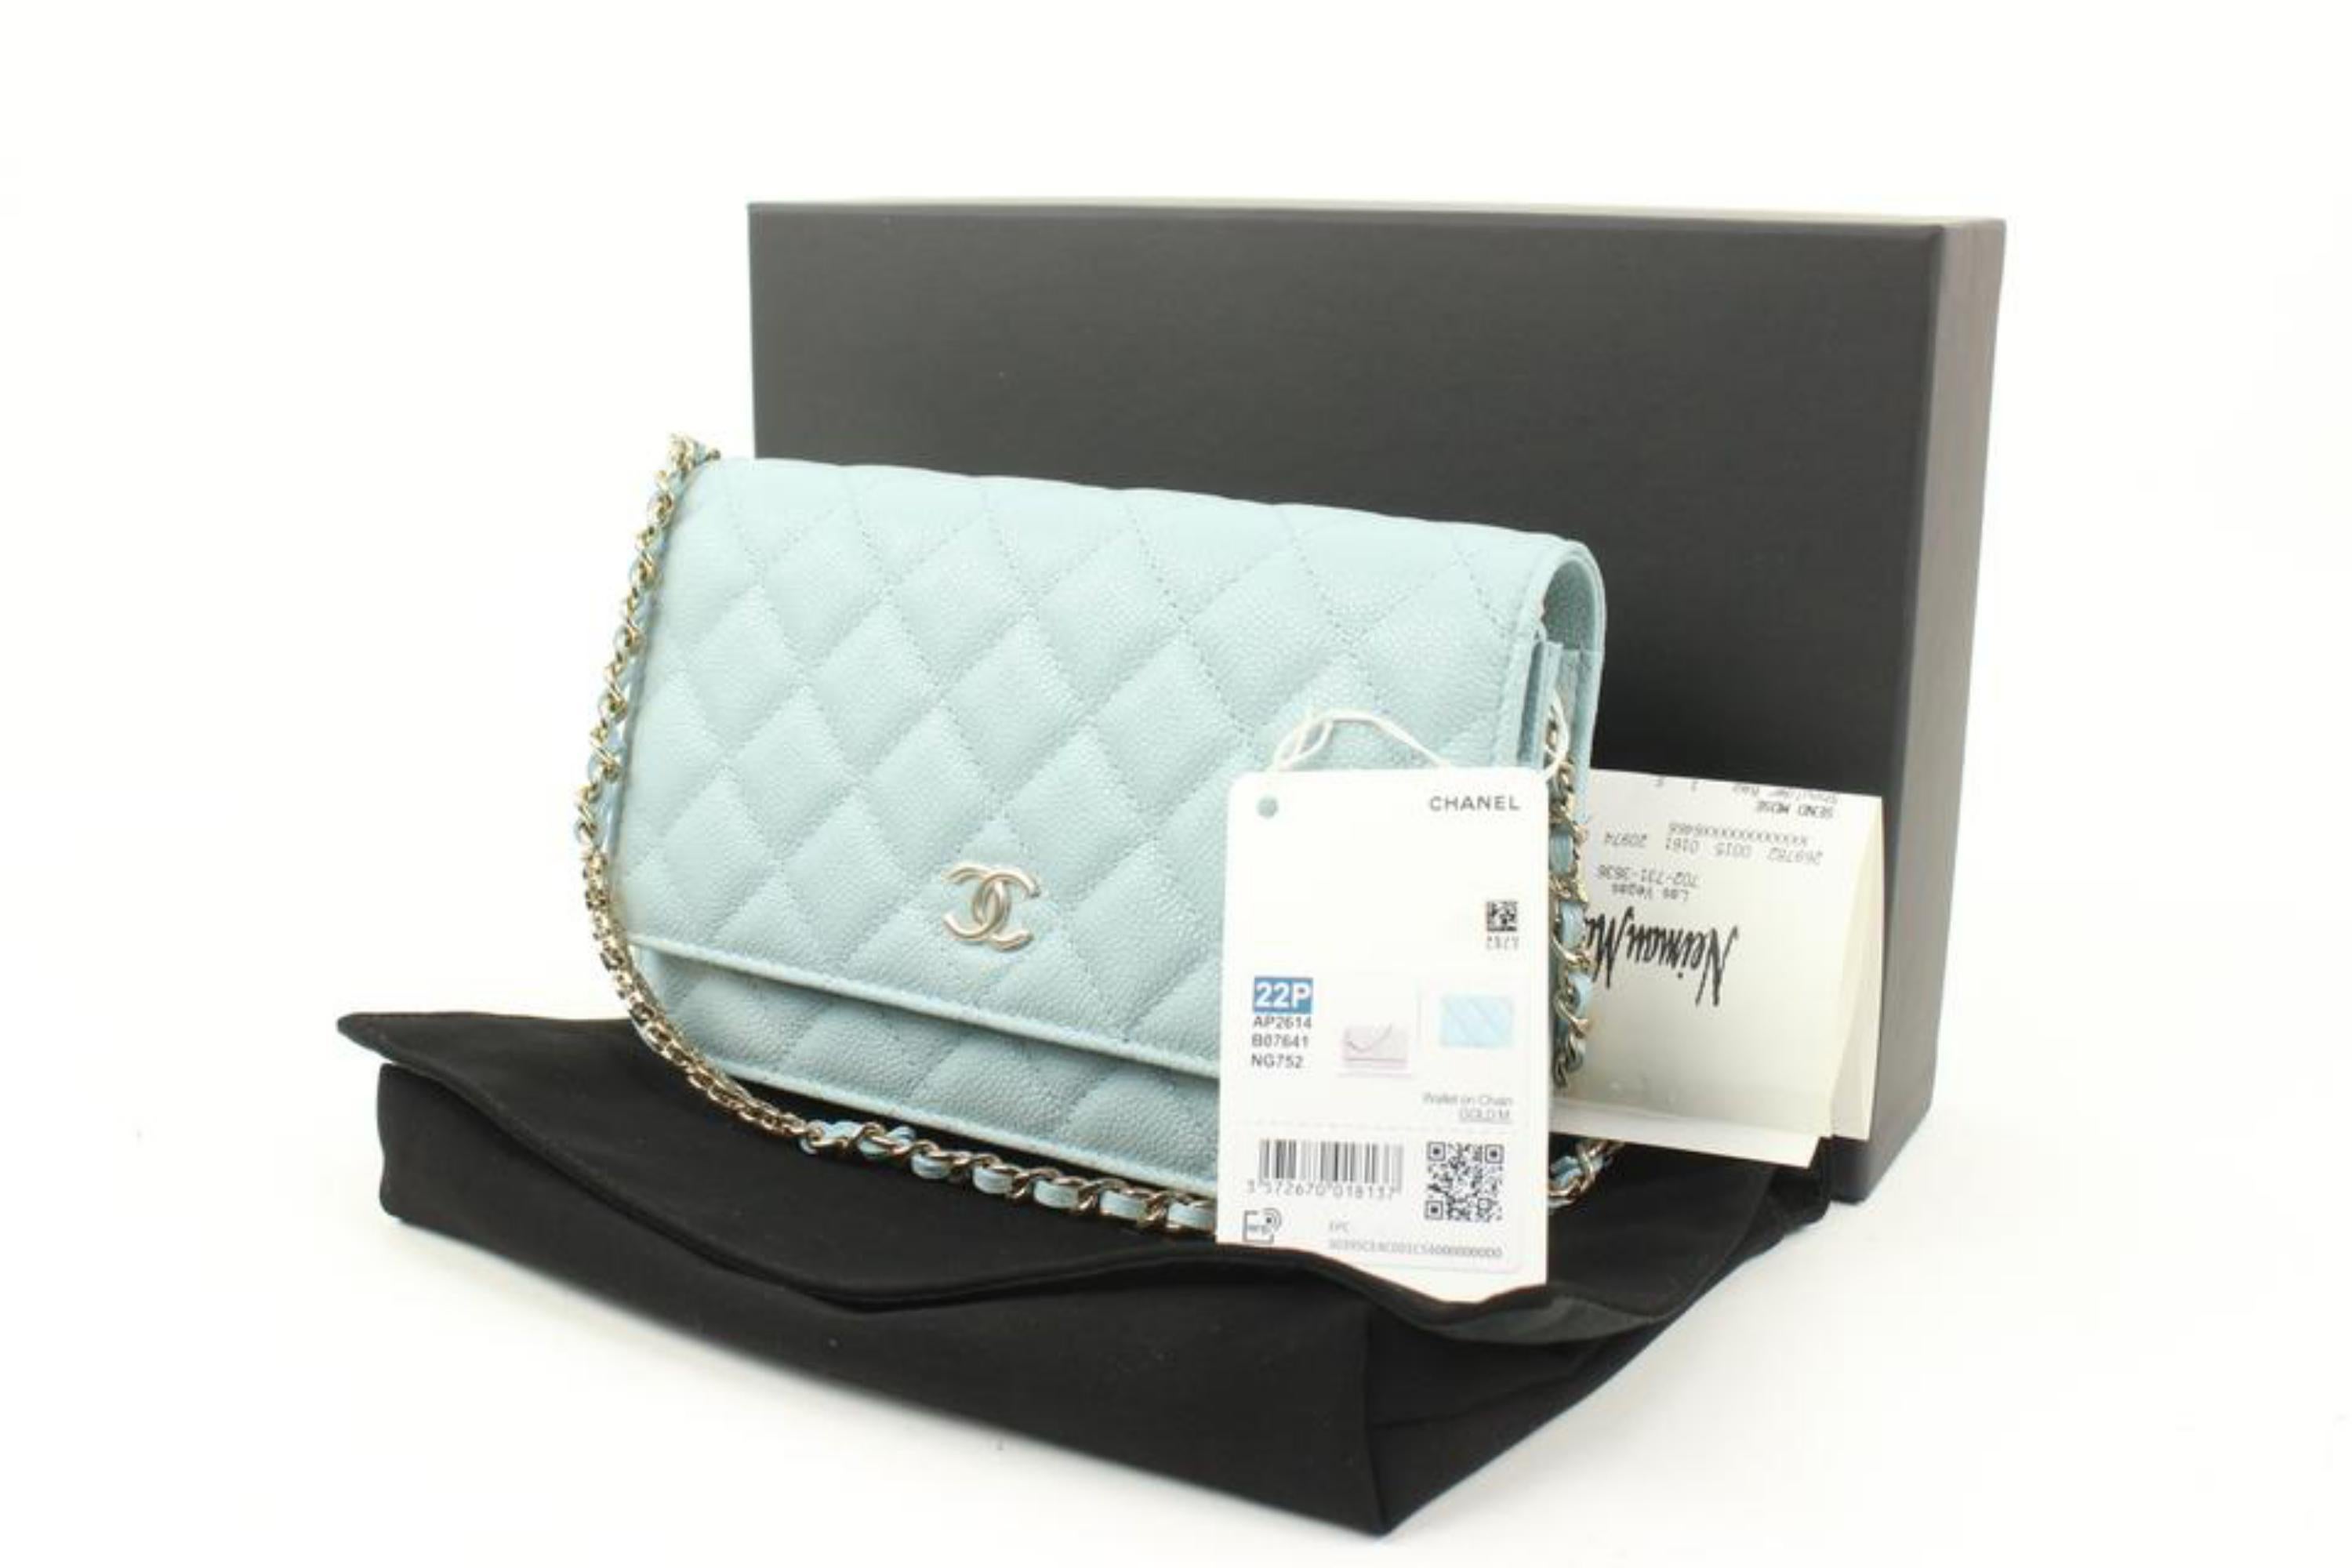 Chanel 22P Seafoam Blue Quilted Caviar Leather Wallet on Chain WOC S126ca48
Date Code/Serial Number: AEJULXLJ
Made In: Italy
Measurements: Length:  7.5